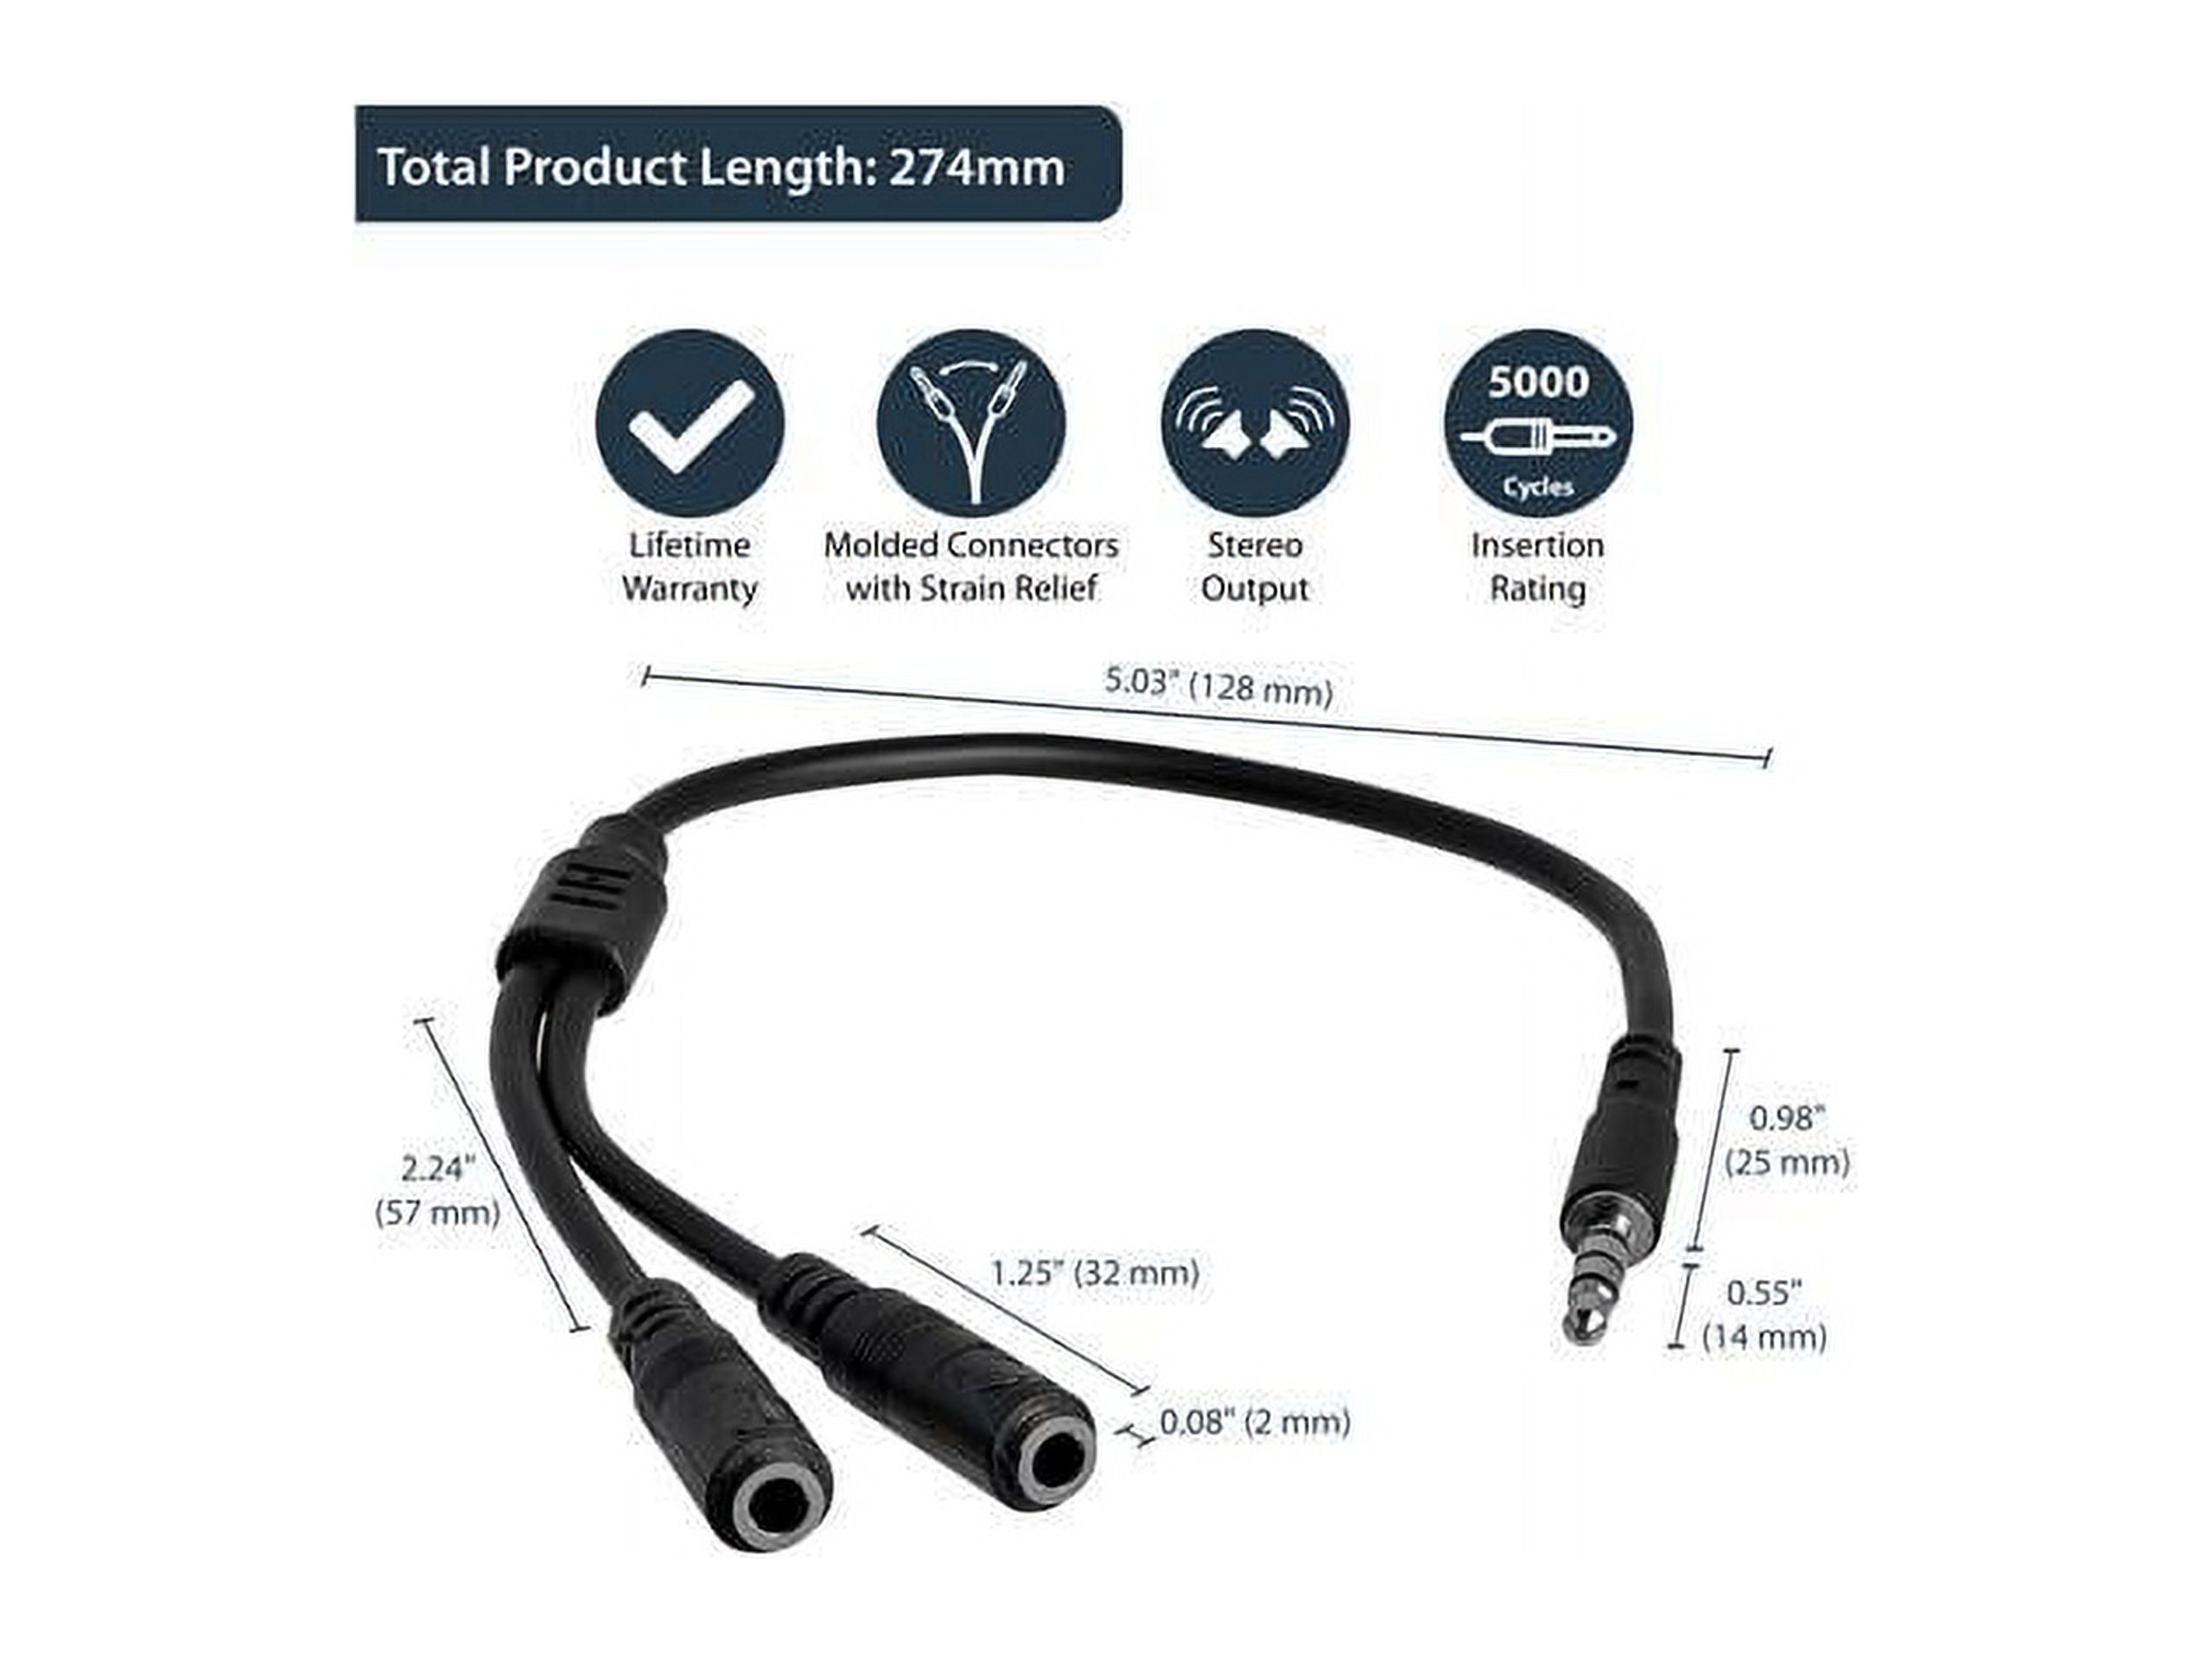 StarTech.com MUYHSMFF Headset adapter for headsets with separate headphone / microphone plugs - 3.5mm 4 position to 2x 3 position 3.5mm M/F - image 2 of 6